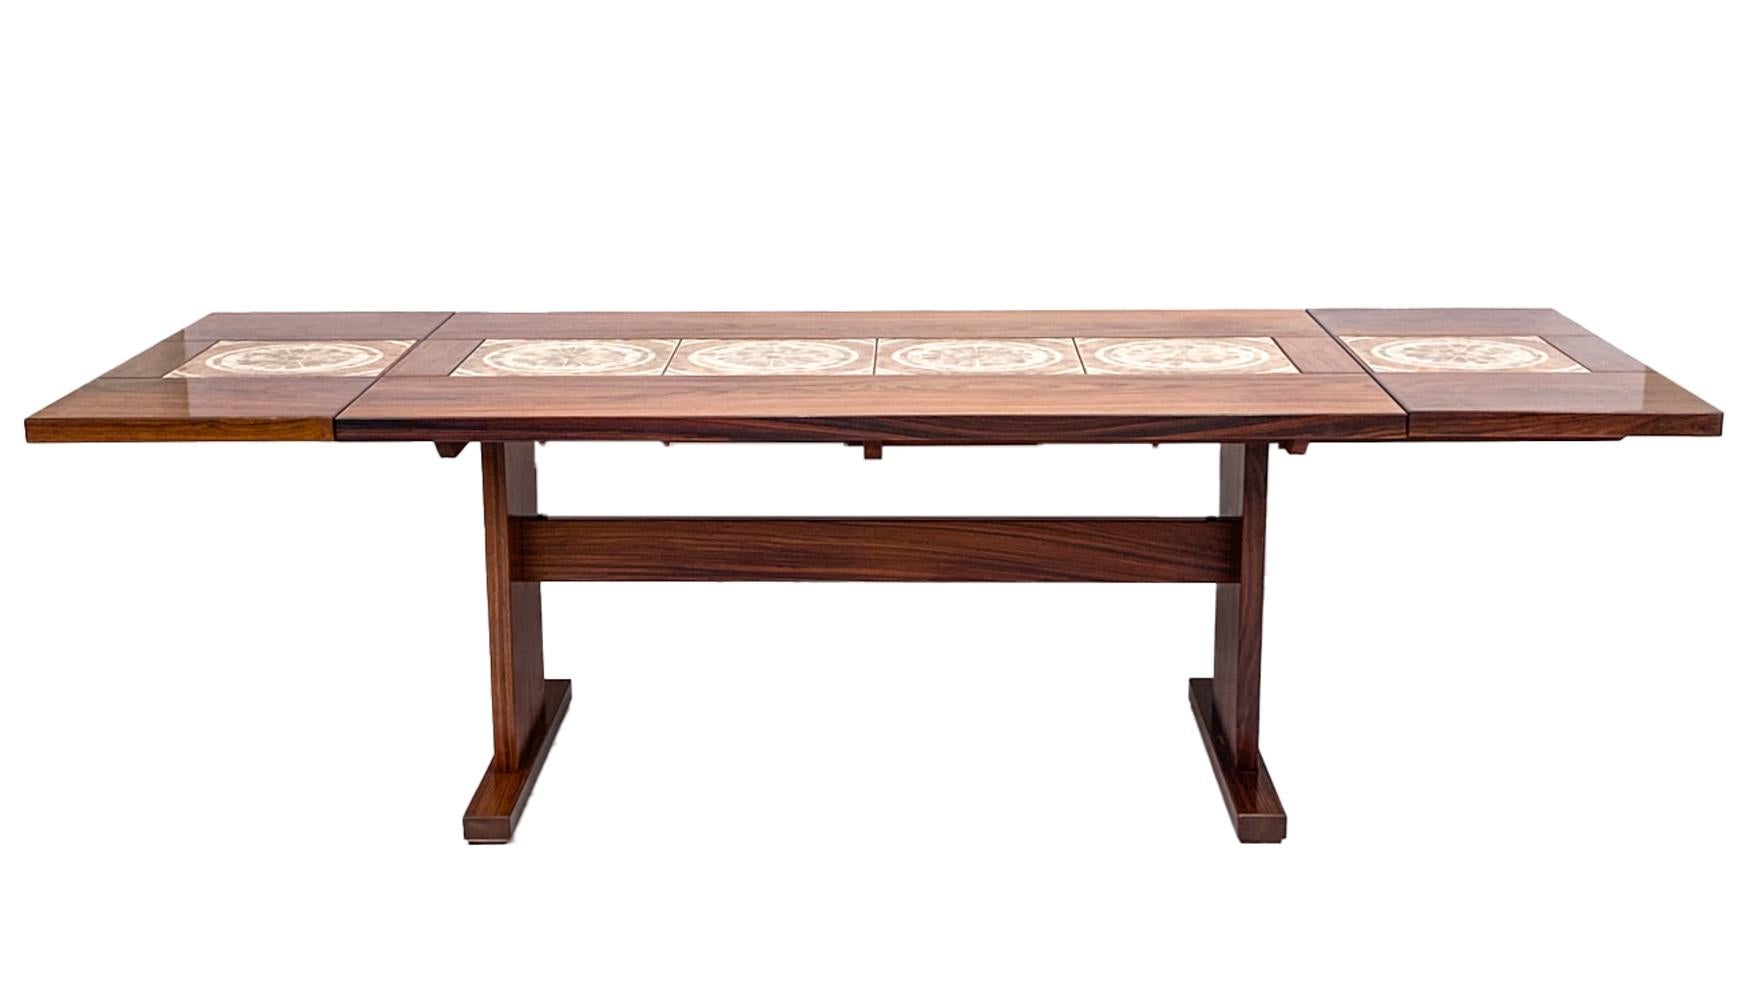 A beautiful Scandinavian modern dining table with handsome rosewood veneer and Ox Art inset abstract design ceramic tiles. A fabulous trestle style base and two 17.5